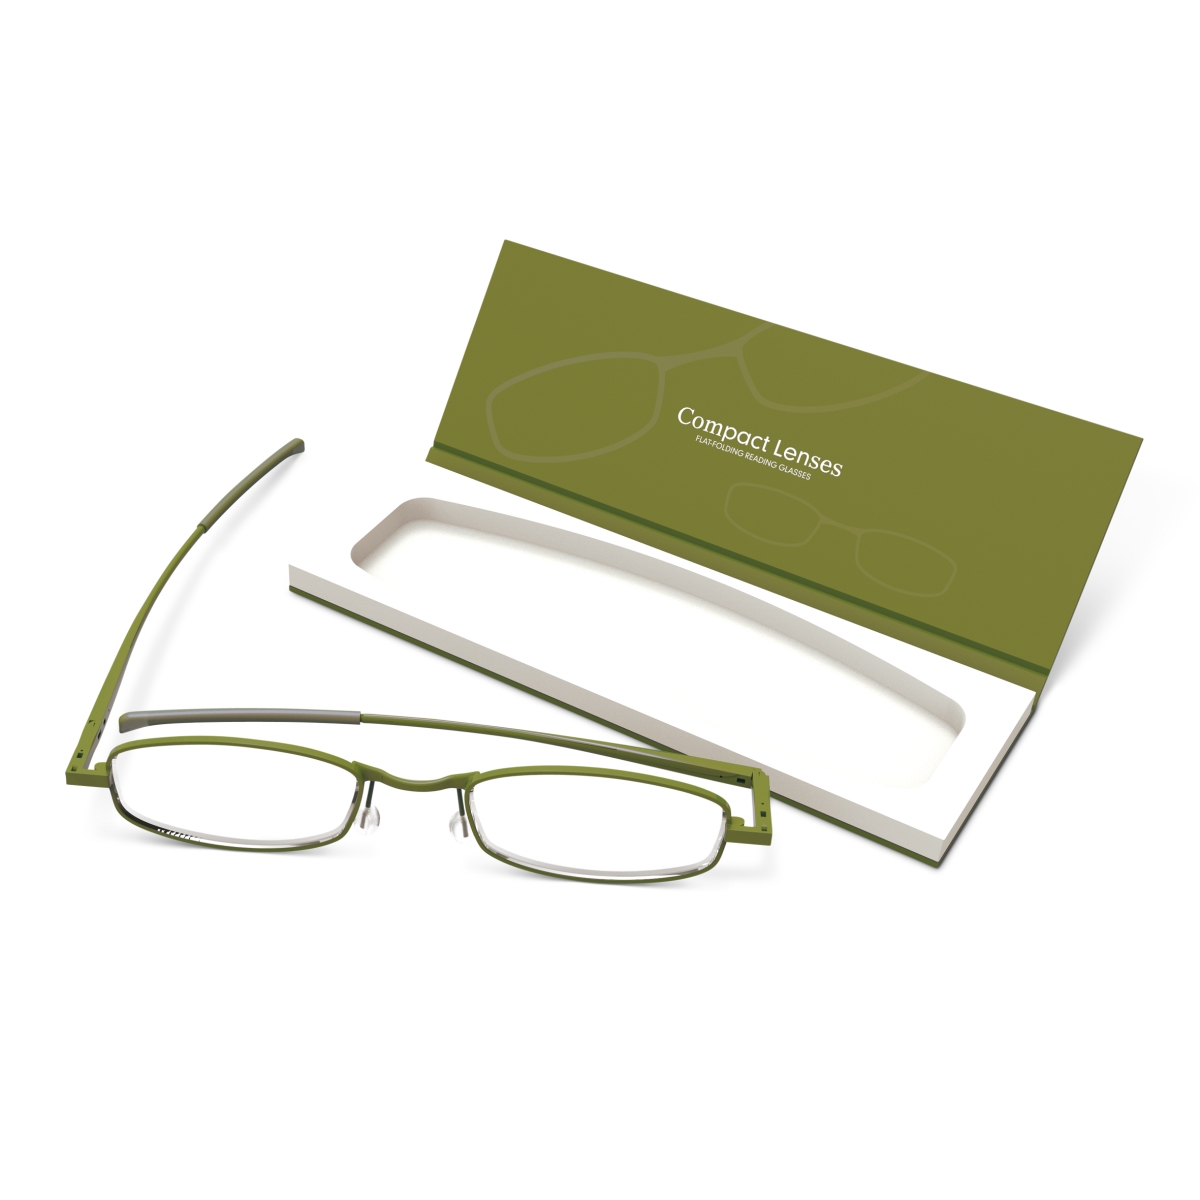 Picture of If USA 91727 Compact Lens Flat Folding Reading Glasses, Olive - Plus 1.5